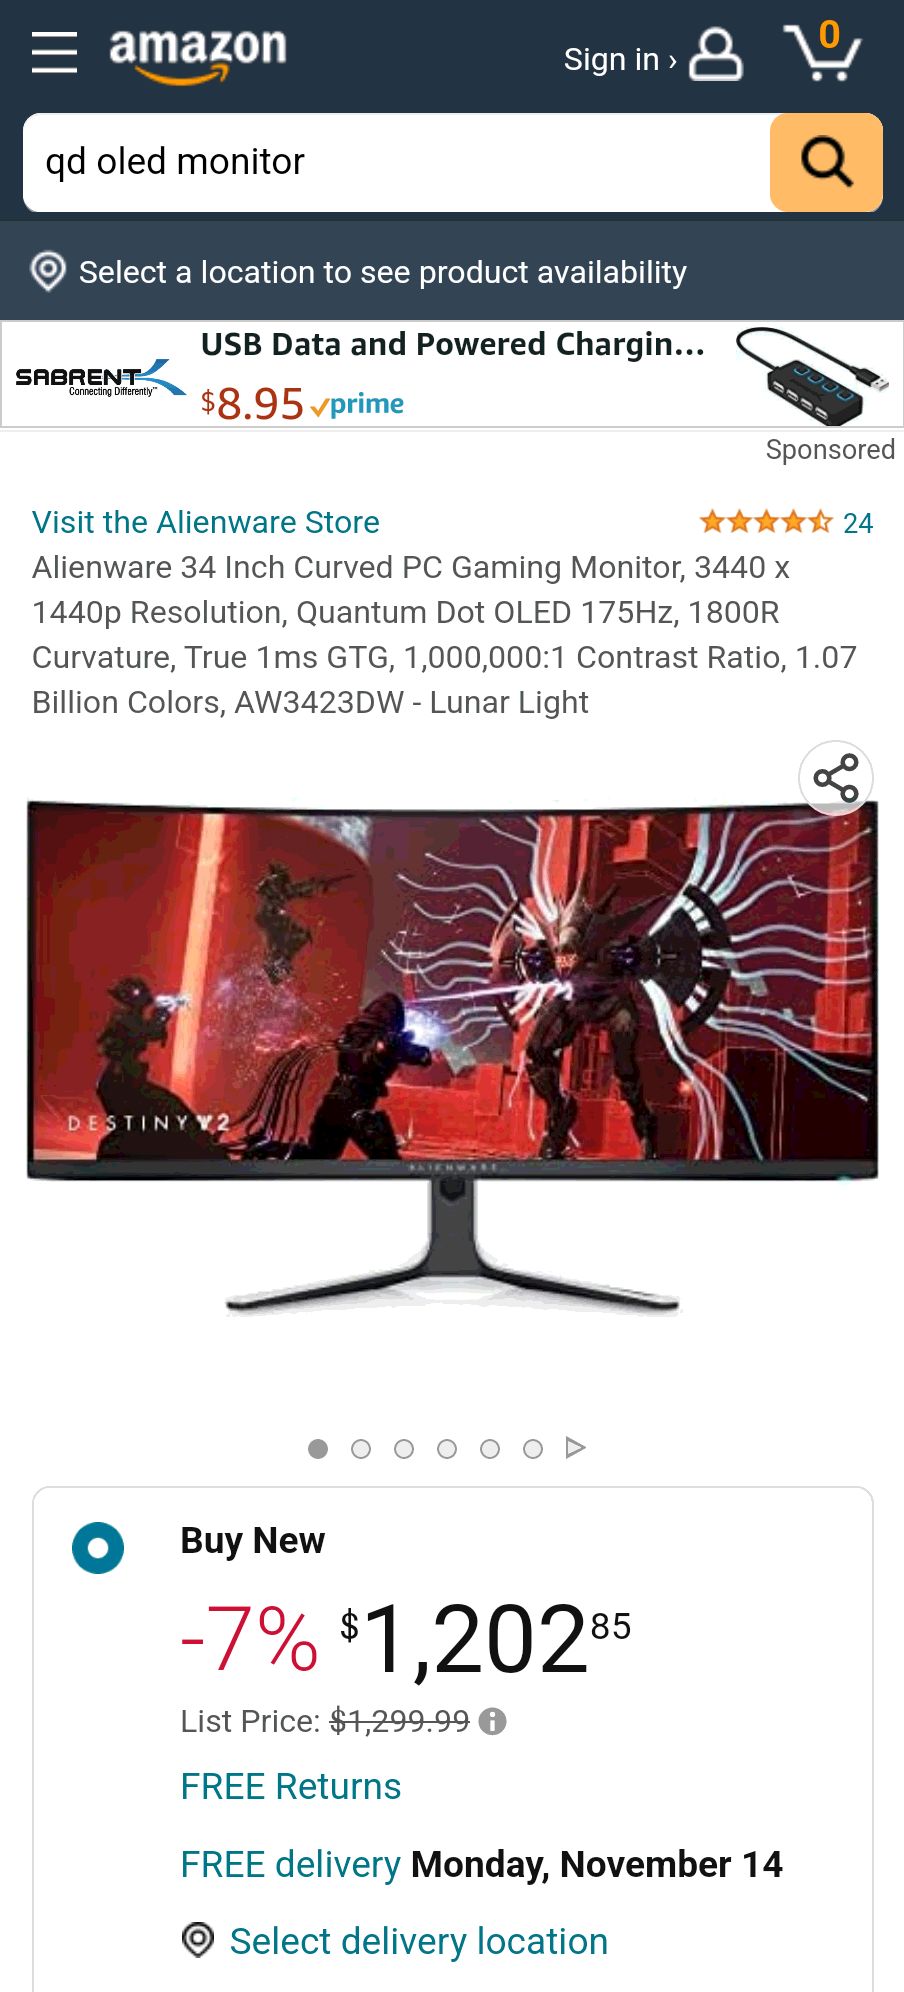 Alienware 34 Inch Curved PC Gaming Monitor, 3440 x 1440p Resolution, Quantum Dot OLED 175Hz, 1800R Curvature, True 1ms GTG, 1,000,000:1 Contrast Ratio, 1.07 Billion Colors, AW3423Dw